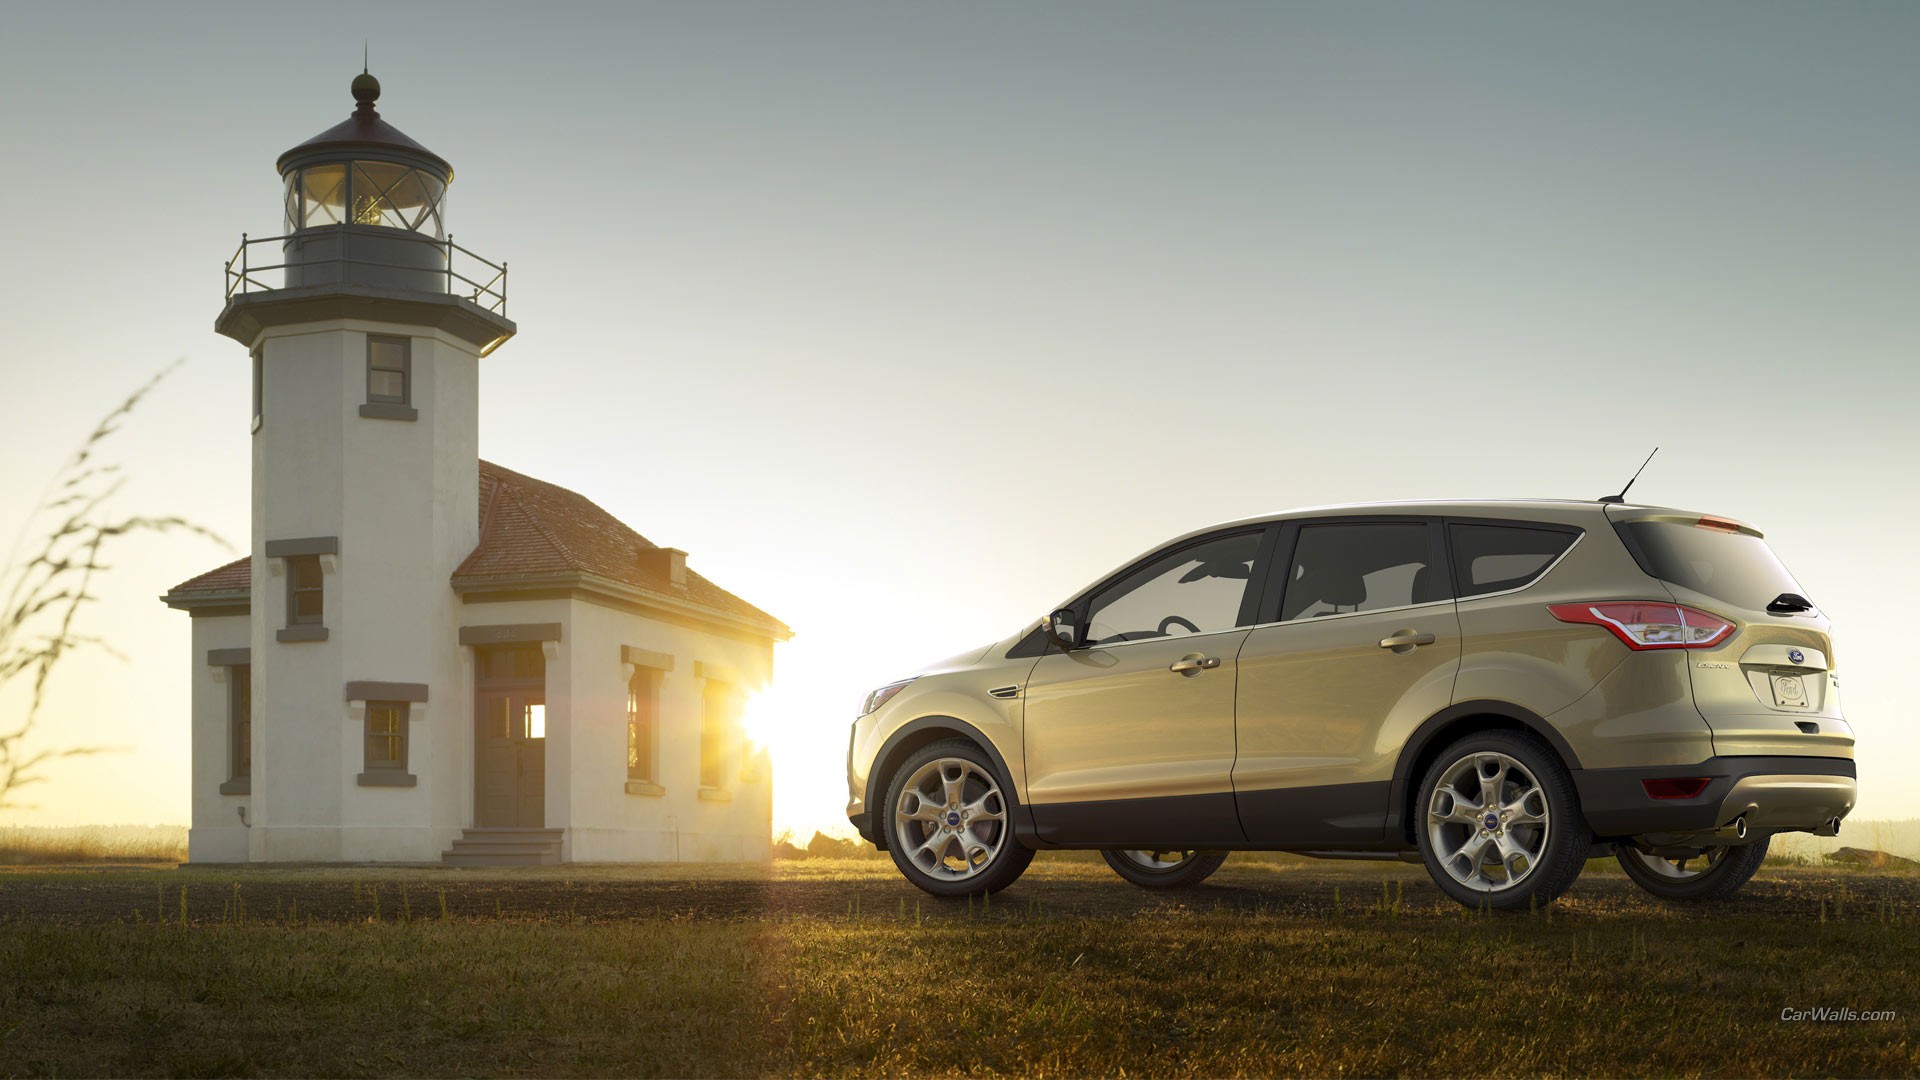 General 1920x1080 car vehicle building Ford lighthouse American cars watermarked Ford Escape Ford Kuga